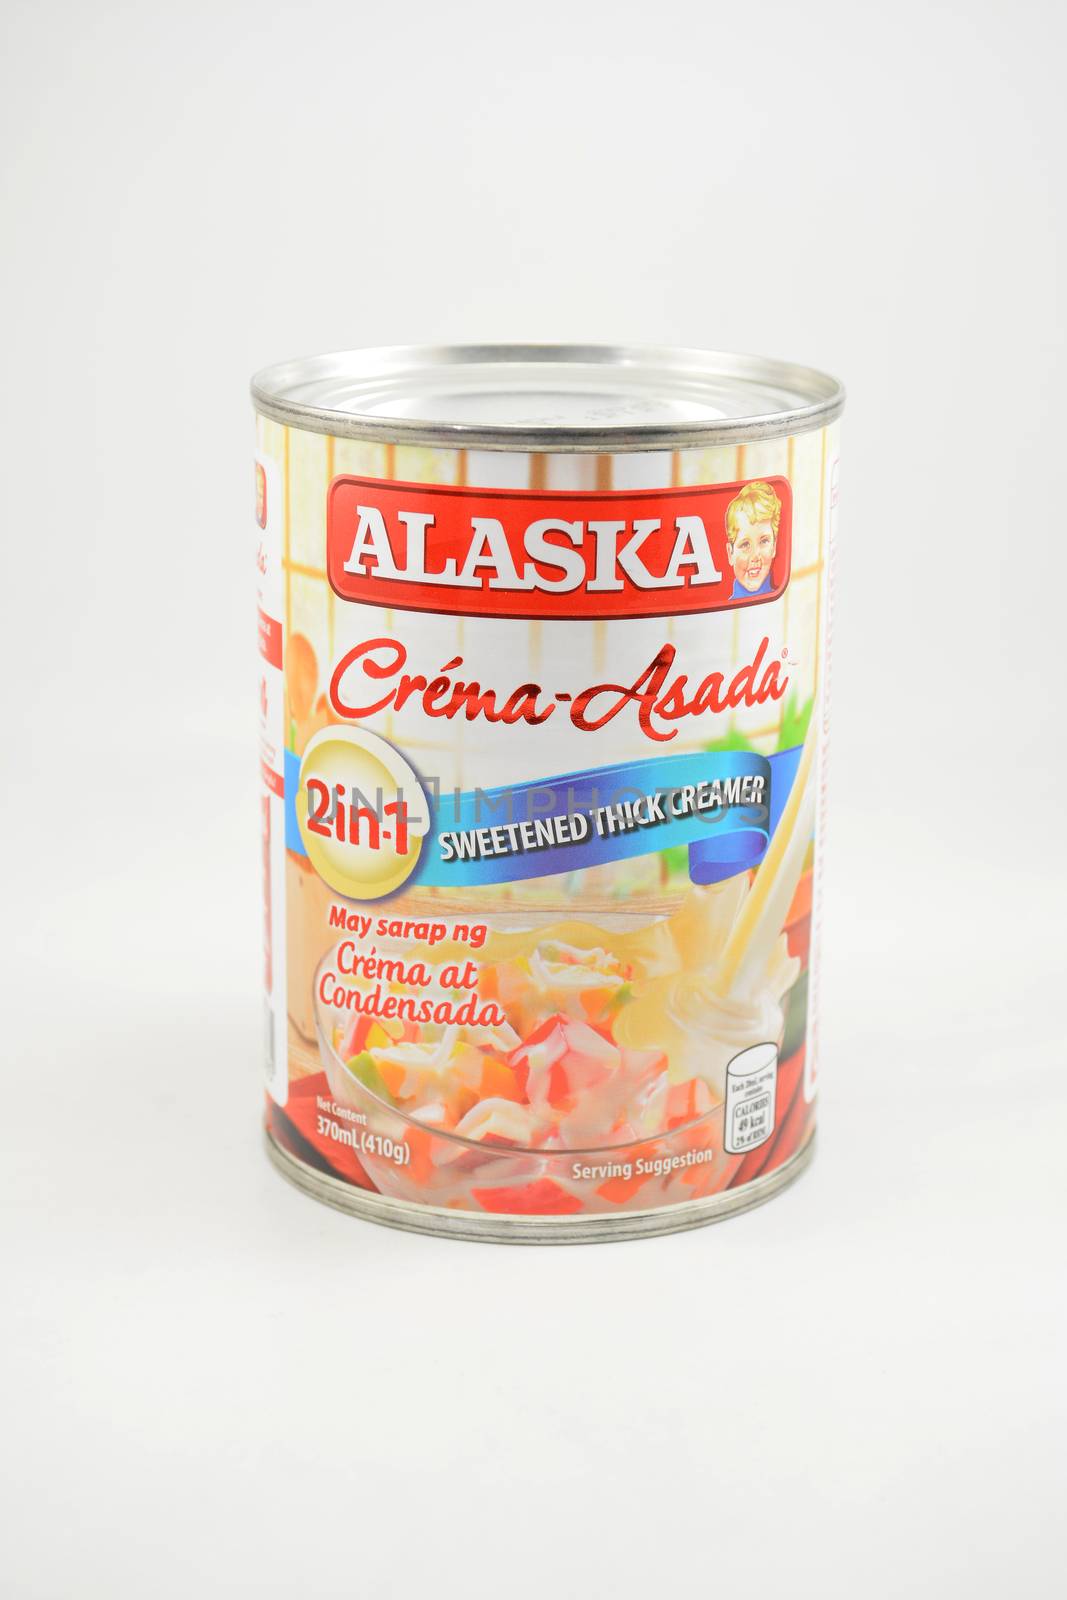 Alasaka sweetened thick creamer and condensed milk can in Manila by imwaltersy